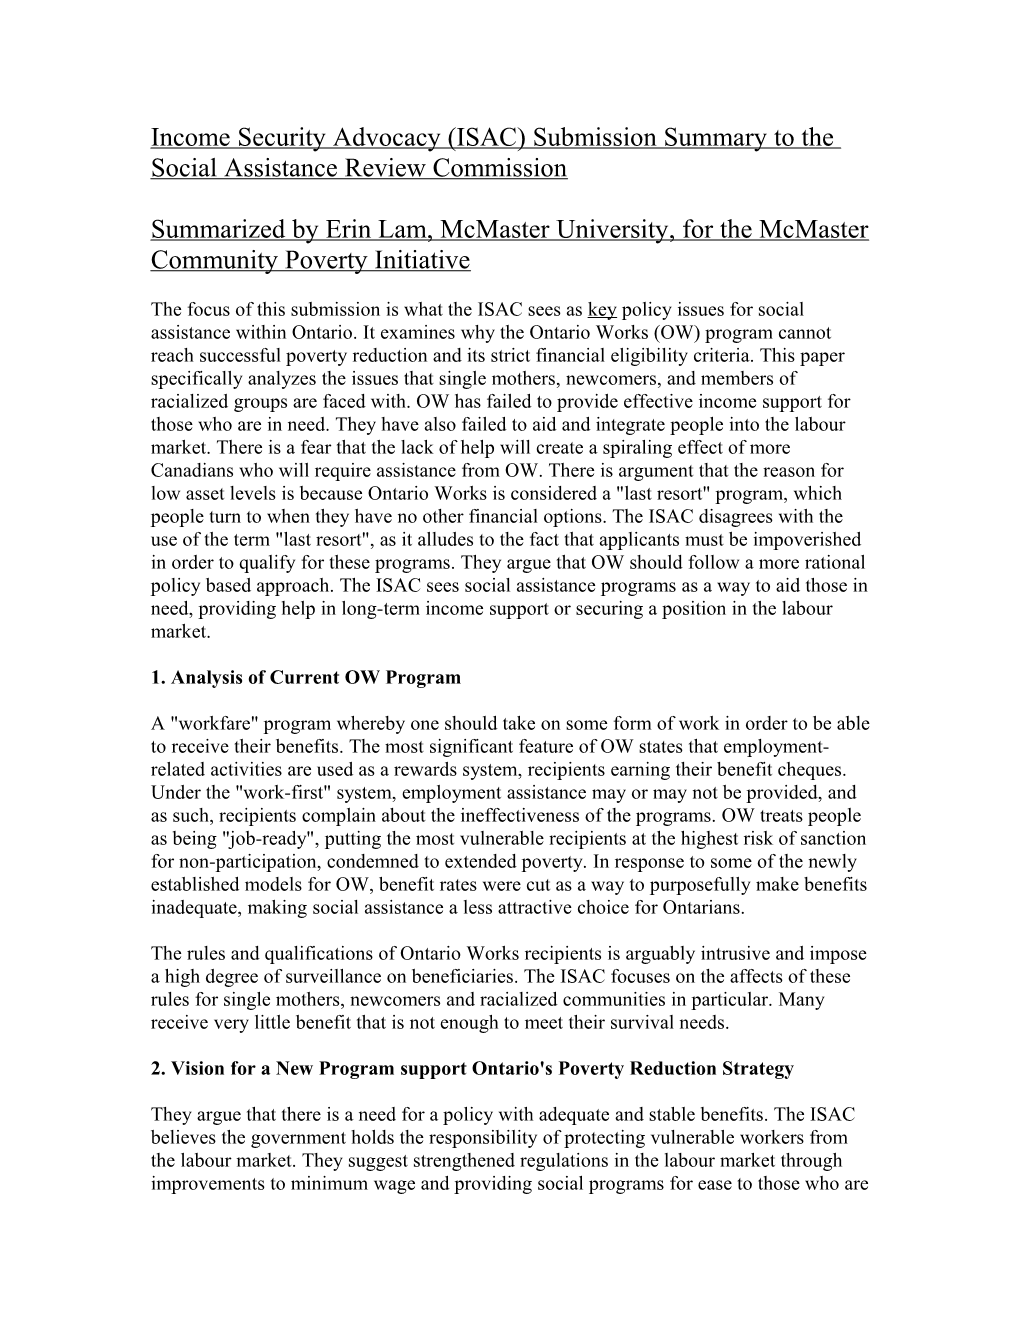 Income Security Advocacy (ISAC) Submission Summary to the Social Assistance Review Commission